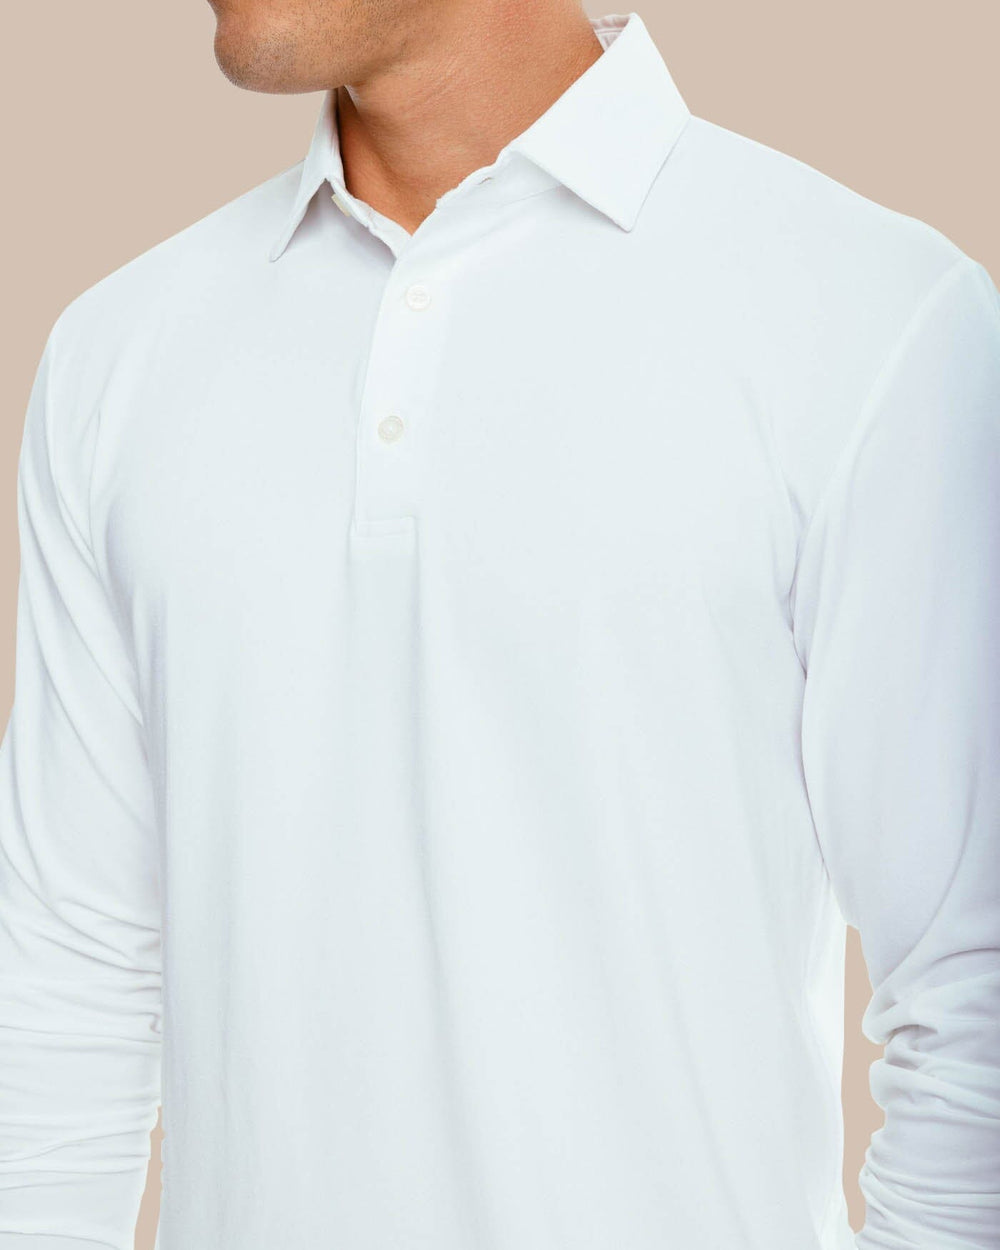 The collar of the Men's Ryder Long Sleeve Performance Polo Shirt by Southern Tide - Classic White